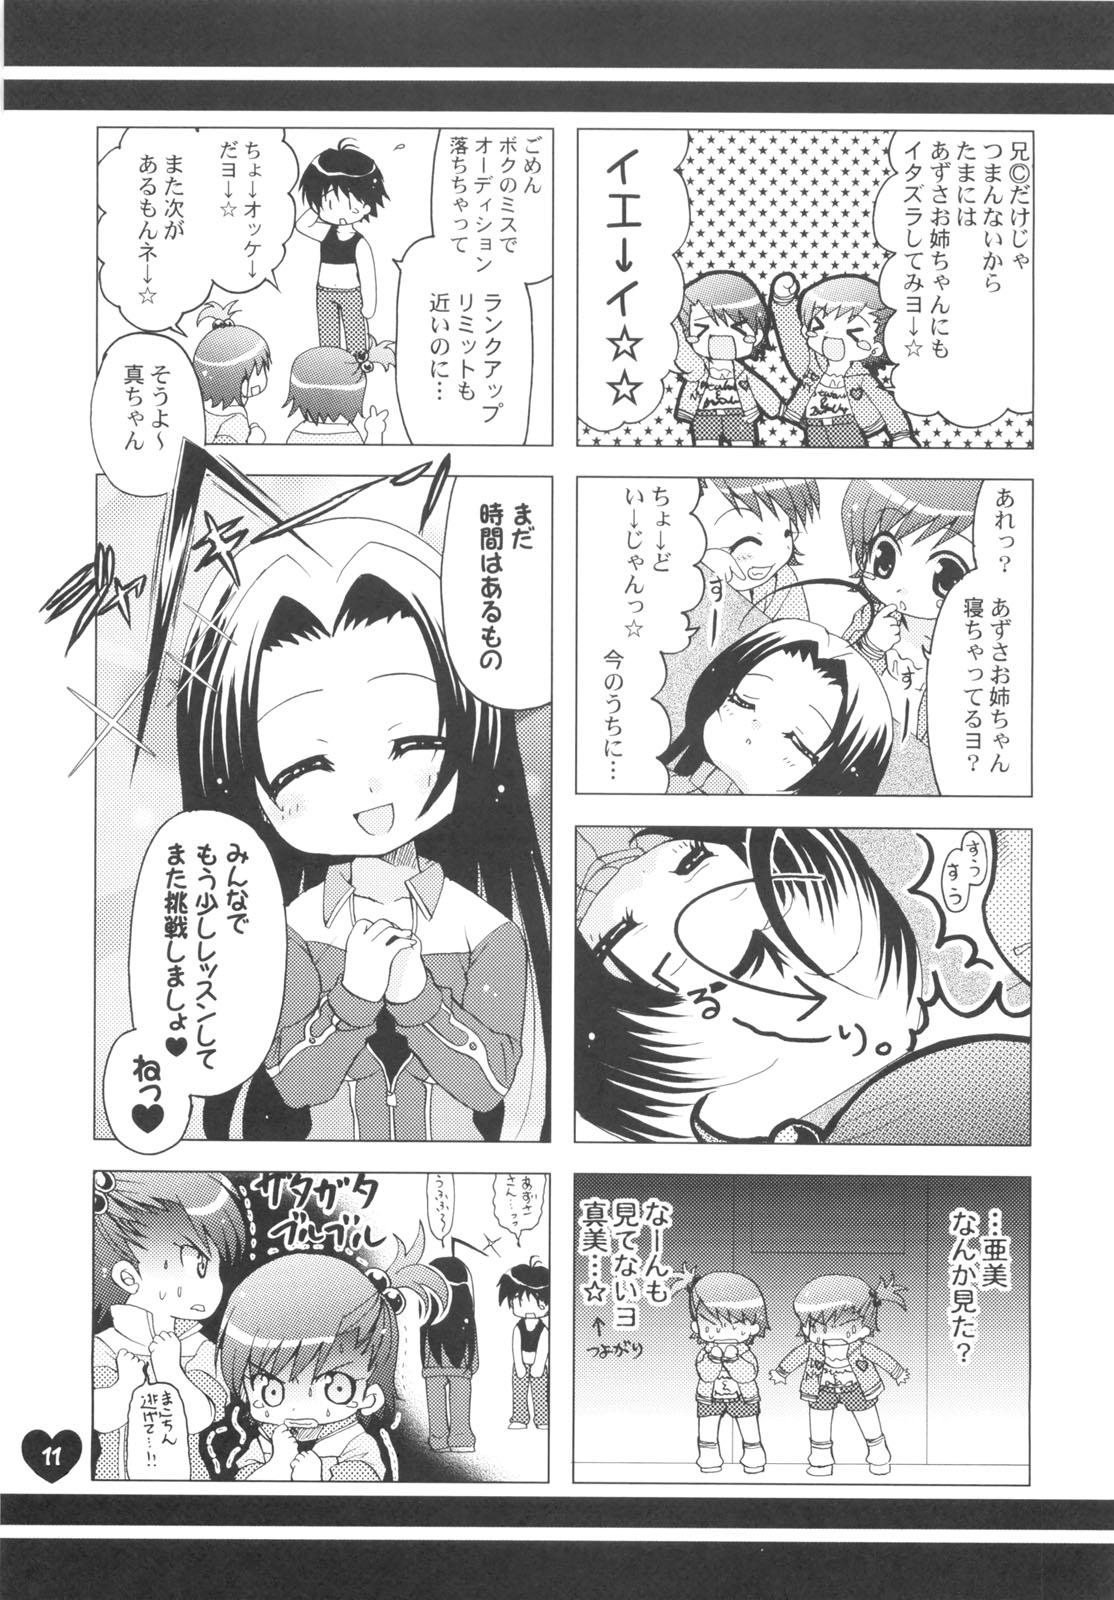 Canadian AMM - The idolmaster Shemale - Page 6